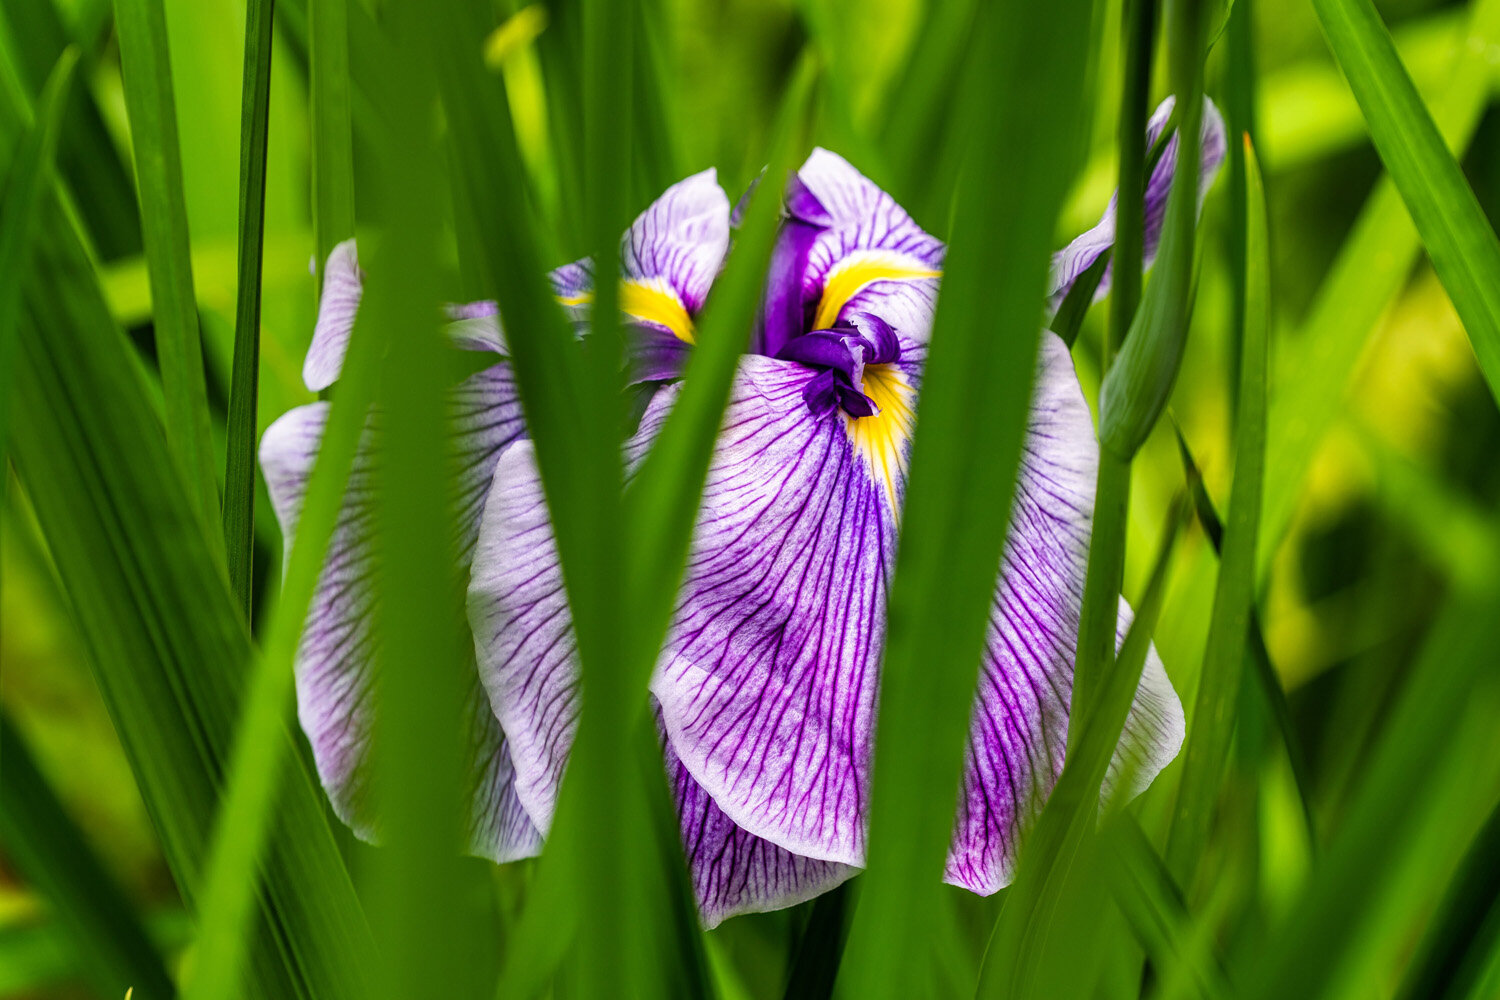 Iris Blooming at the Koi Pond at the Portland Japanese Garden